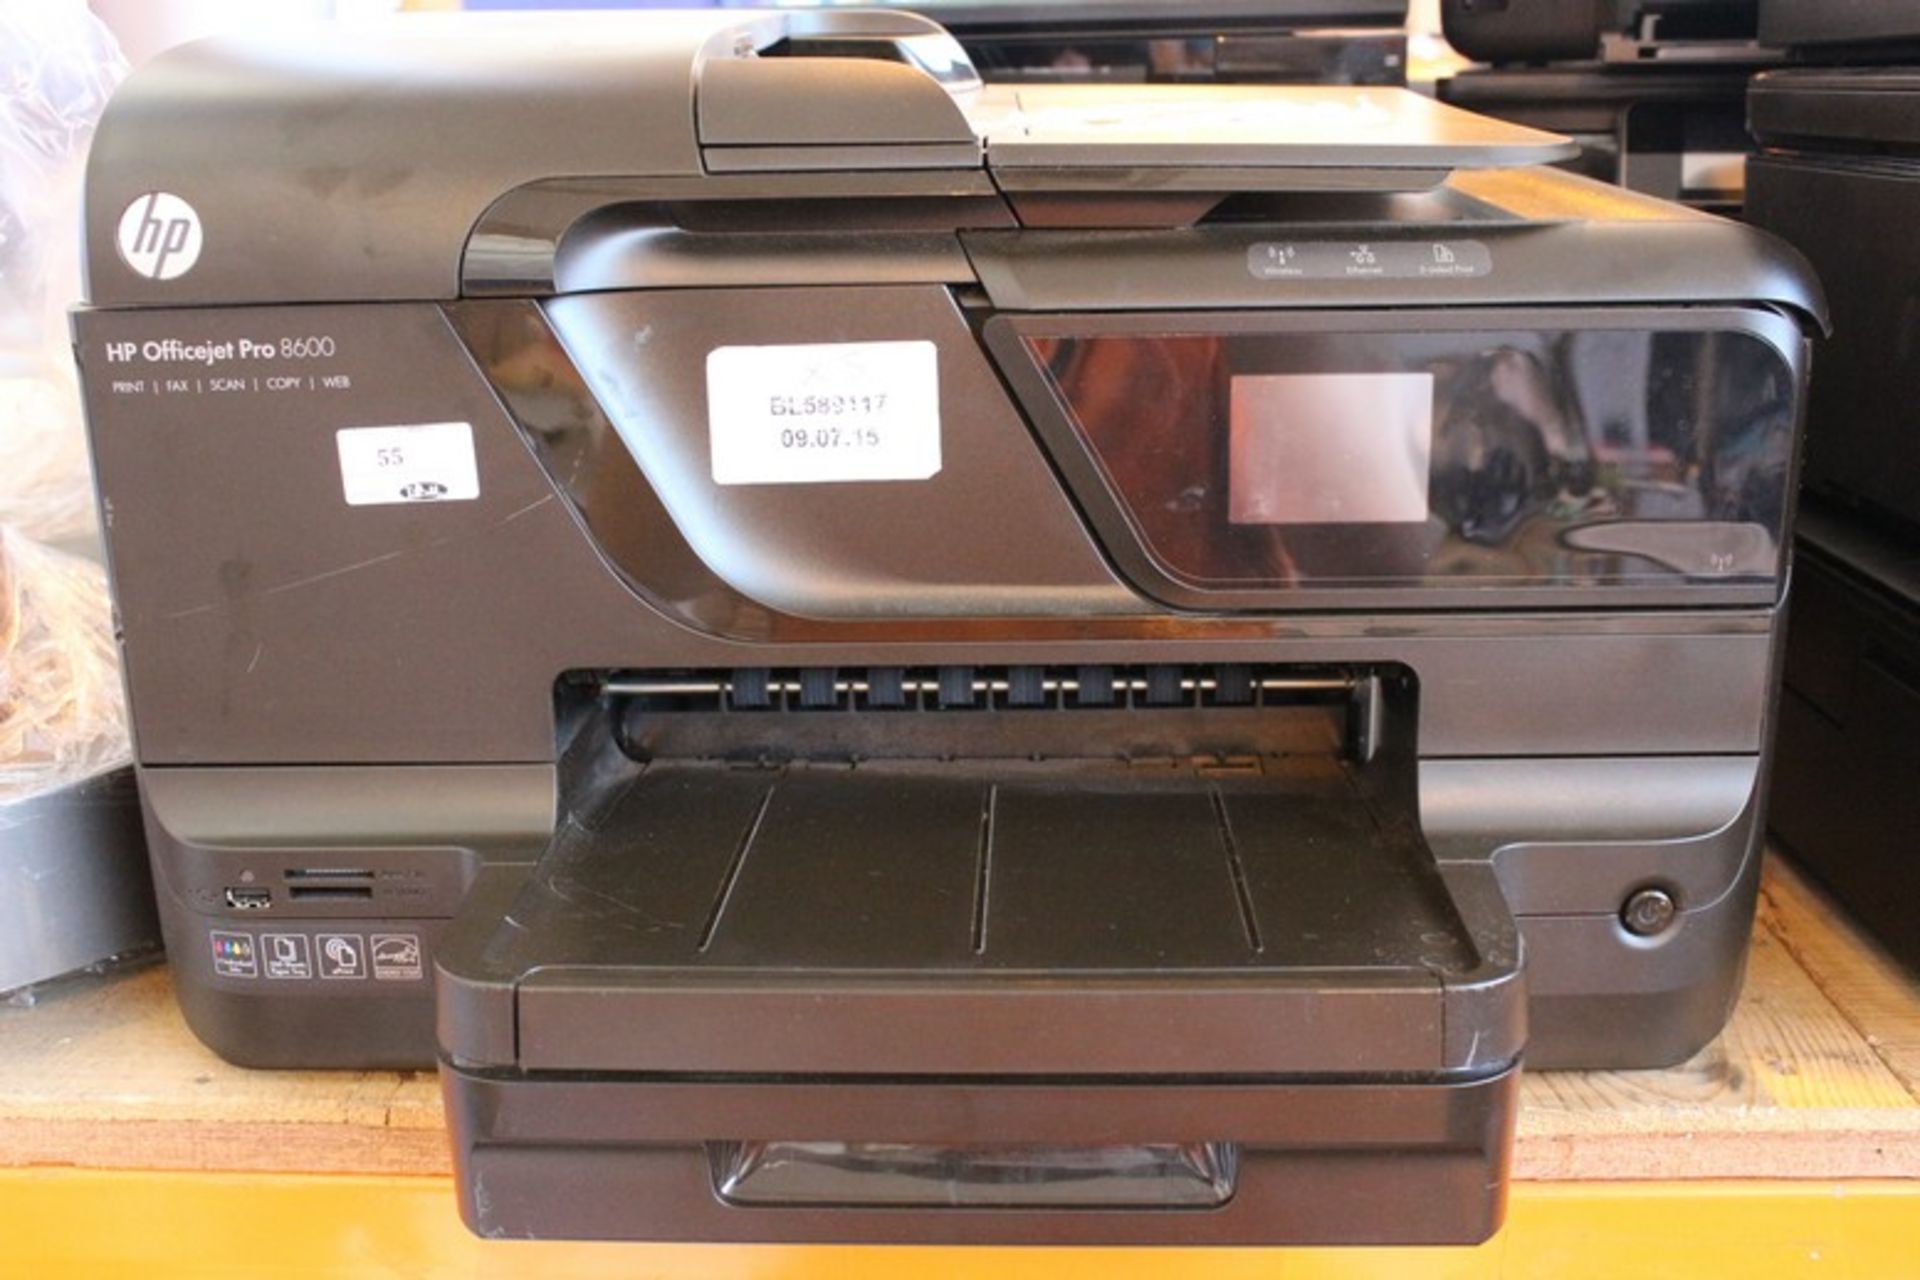 4 x ASSORTED ALL IN ONE PRINTER SCANNER COPIERS BY HP OFFICE JET PRO 8600 AND HP ENVY 120 RRP £90-£